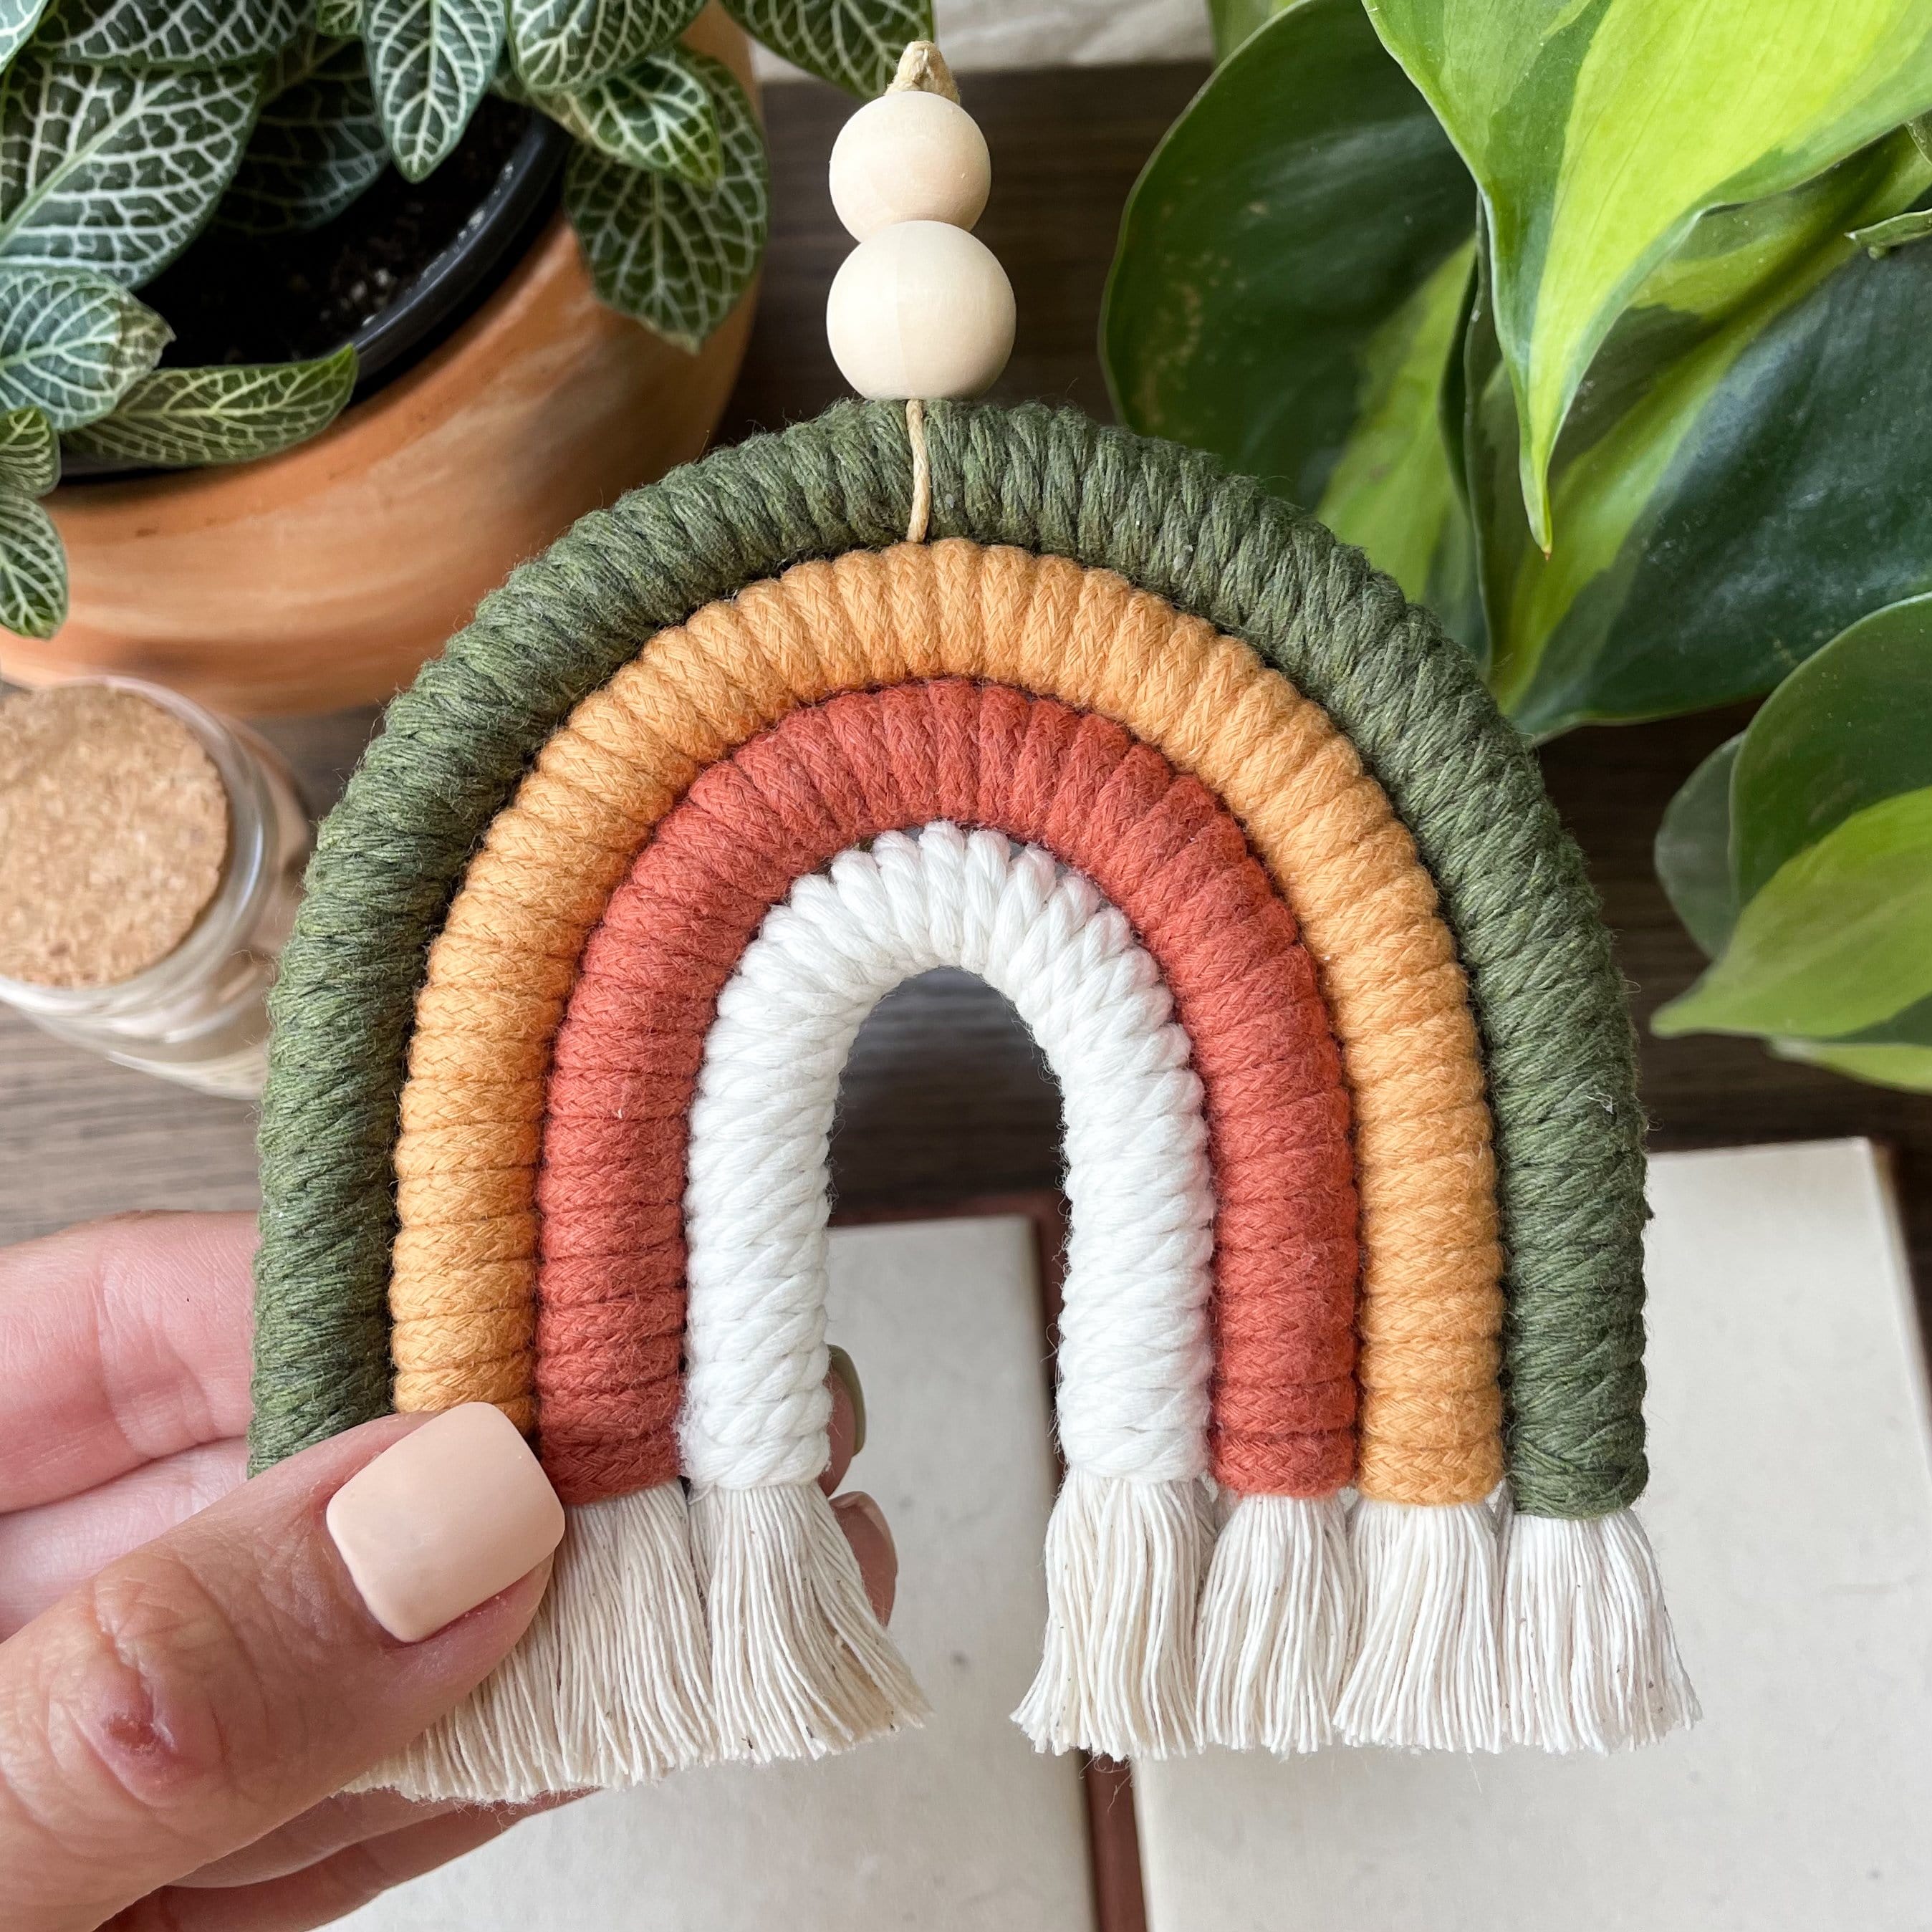 Rainbow Macrame Wall Hanging in white, orange, yellow, and olive green